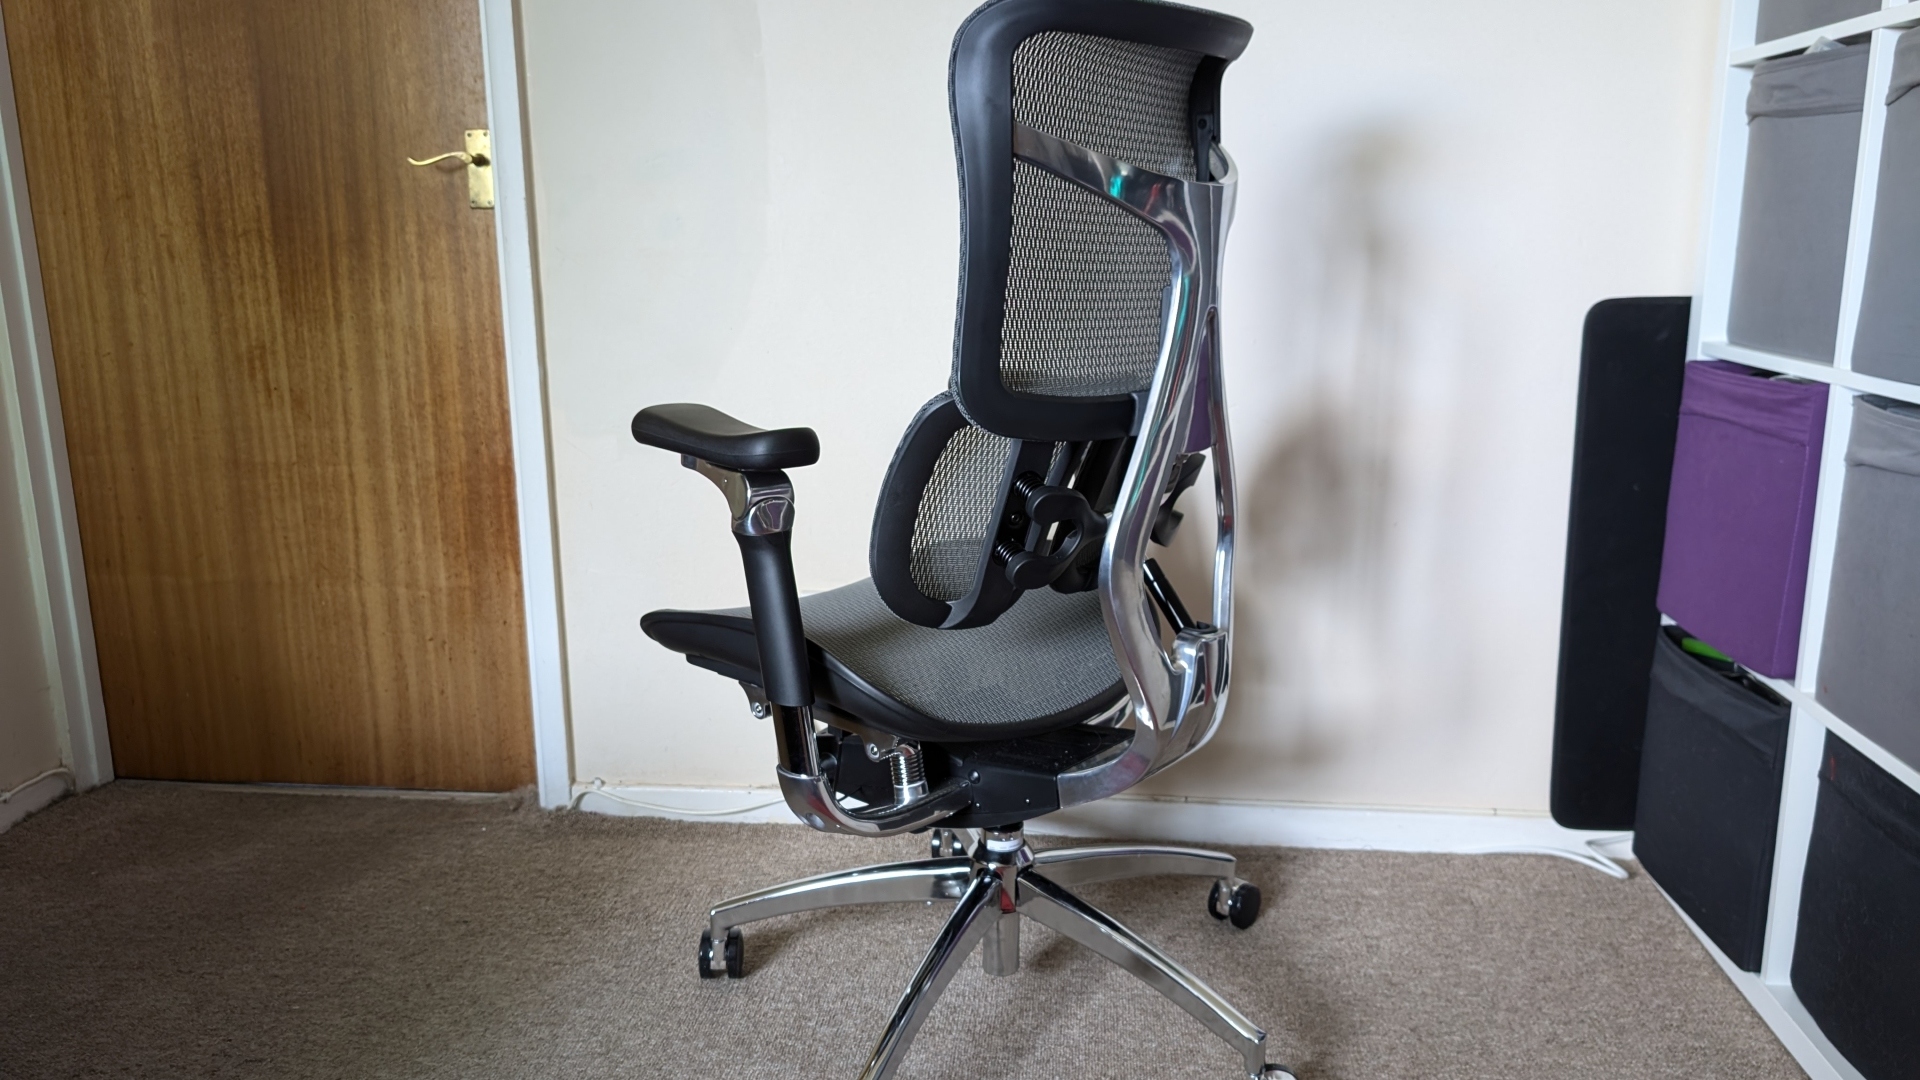 Sihoo S300 ergonomic office chair review image showing the back side of the chair.